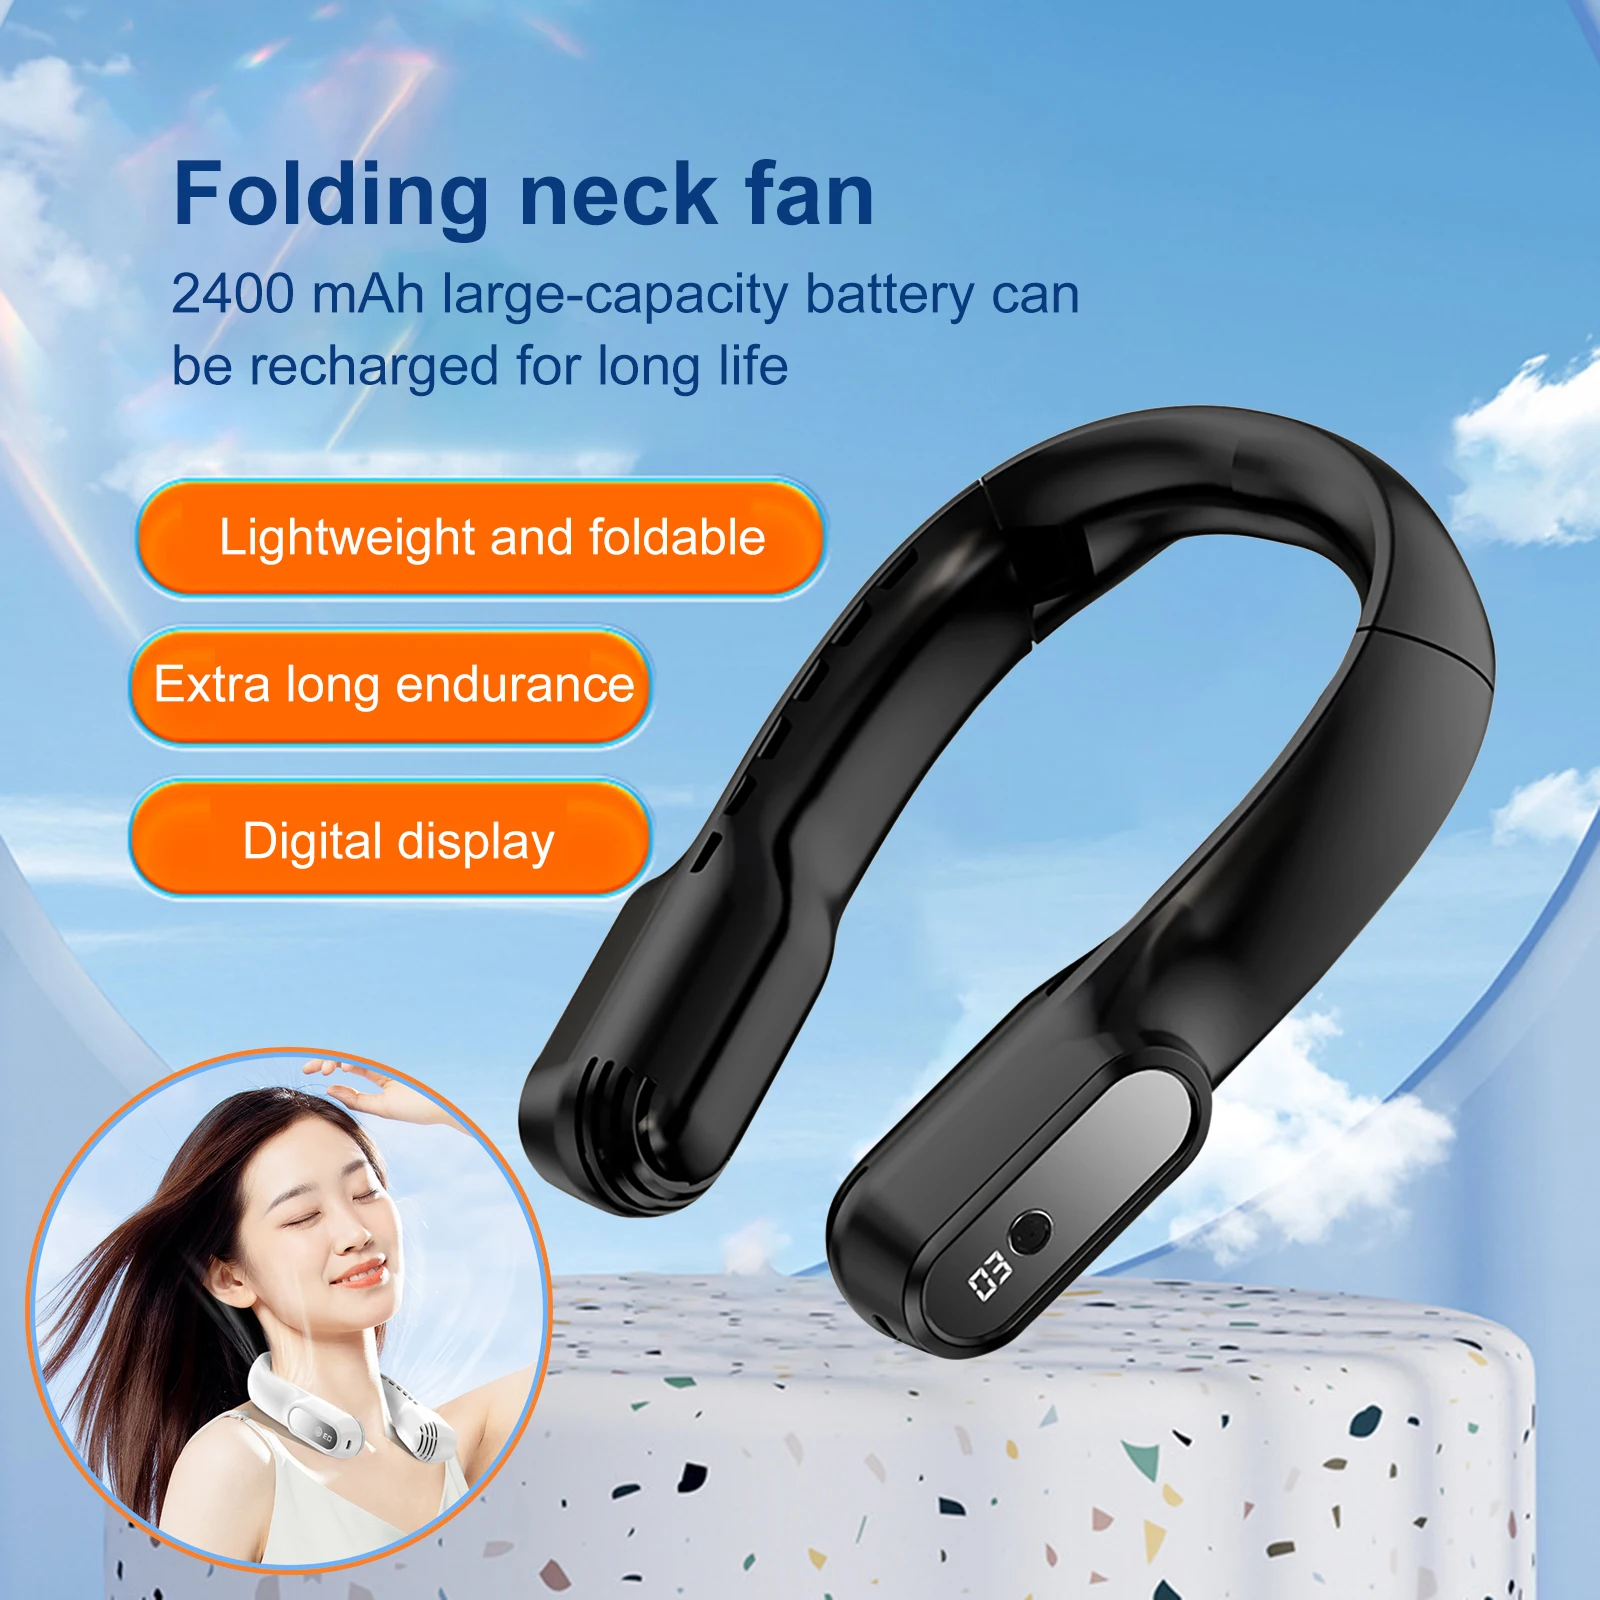 

Portable 2400mAh Hanging Neck Fan Foldable Summer Air Cooling USB Rechargeable Bladeless Mute 3-speed Neckband Fans Outdoor